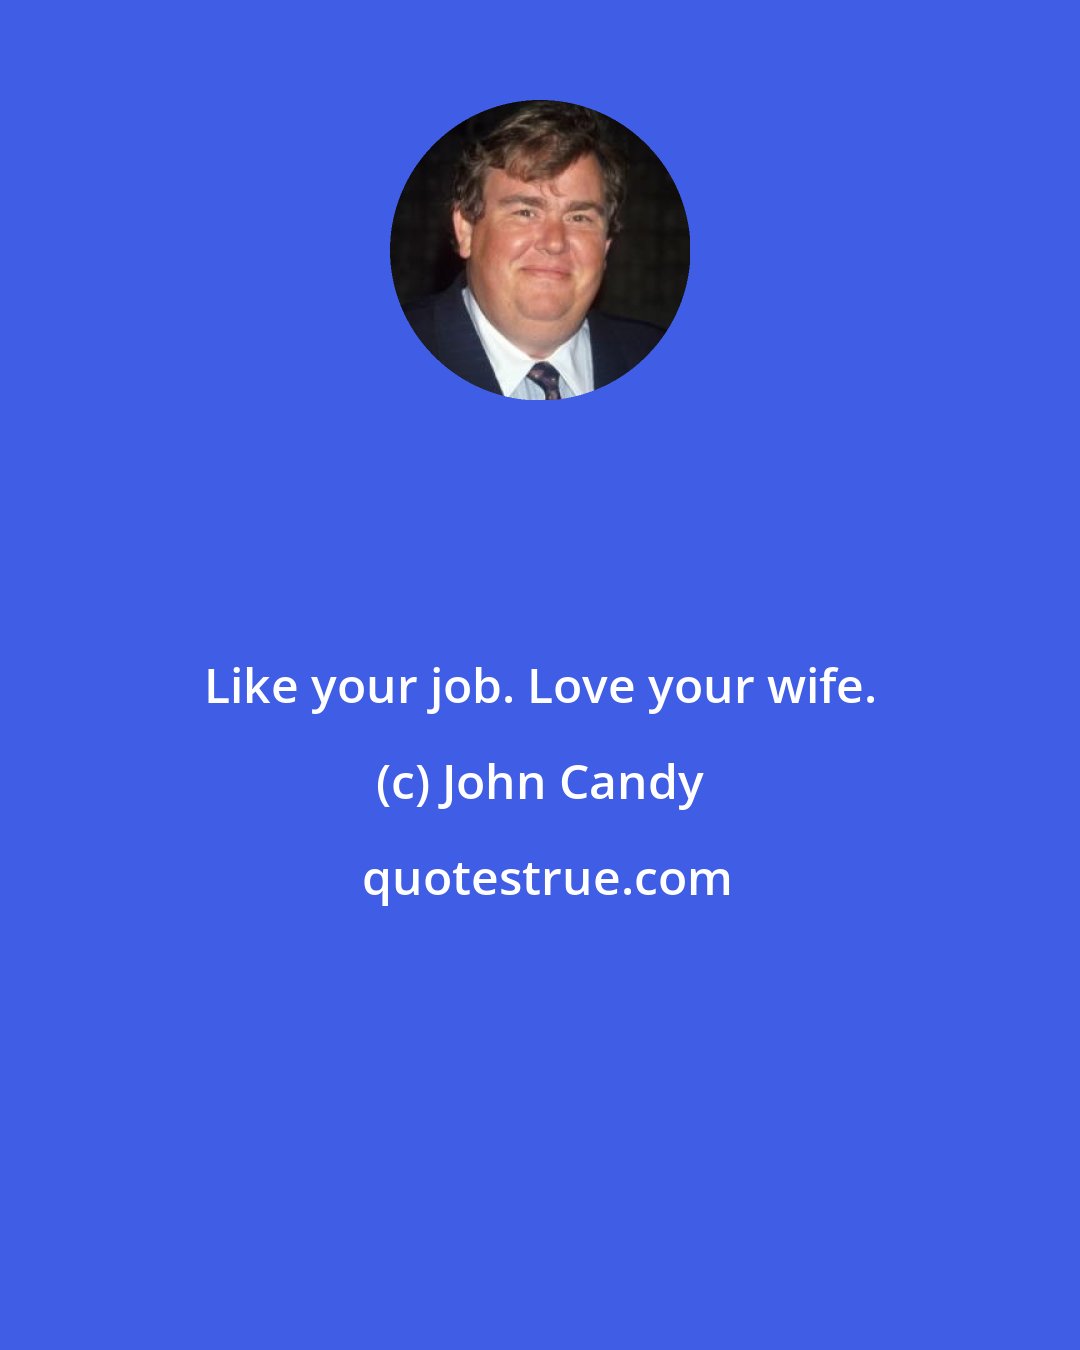 John Candy: Like your job. Love your wife.